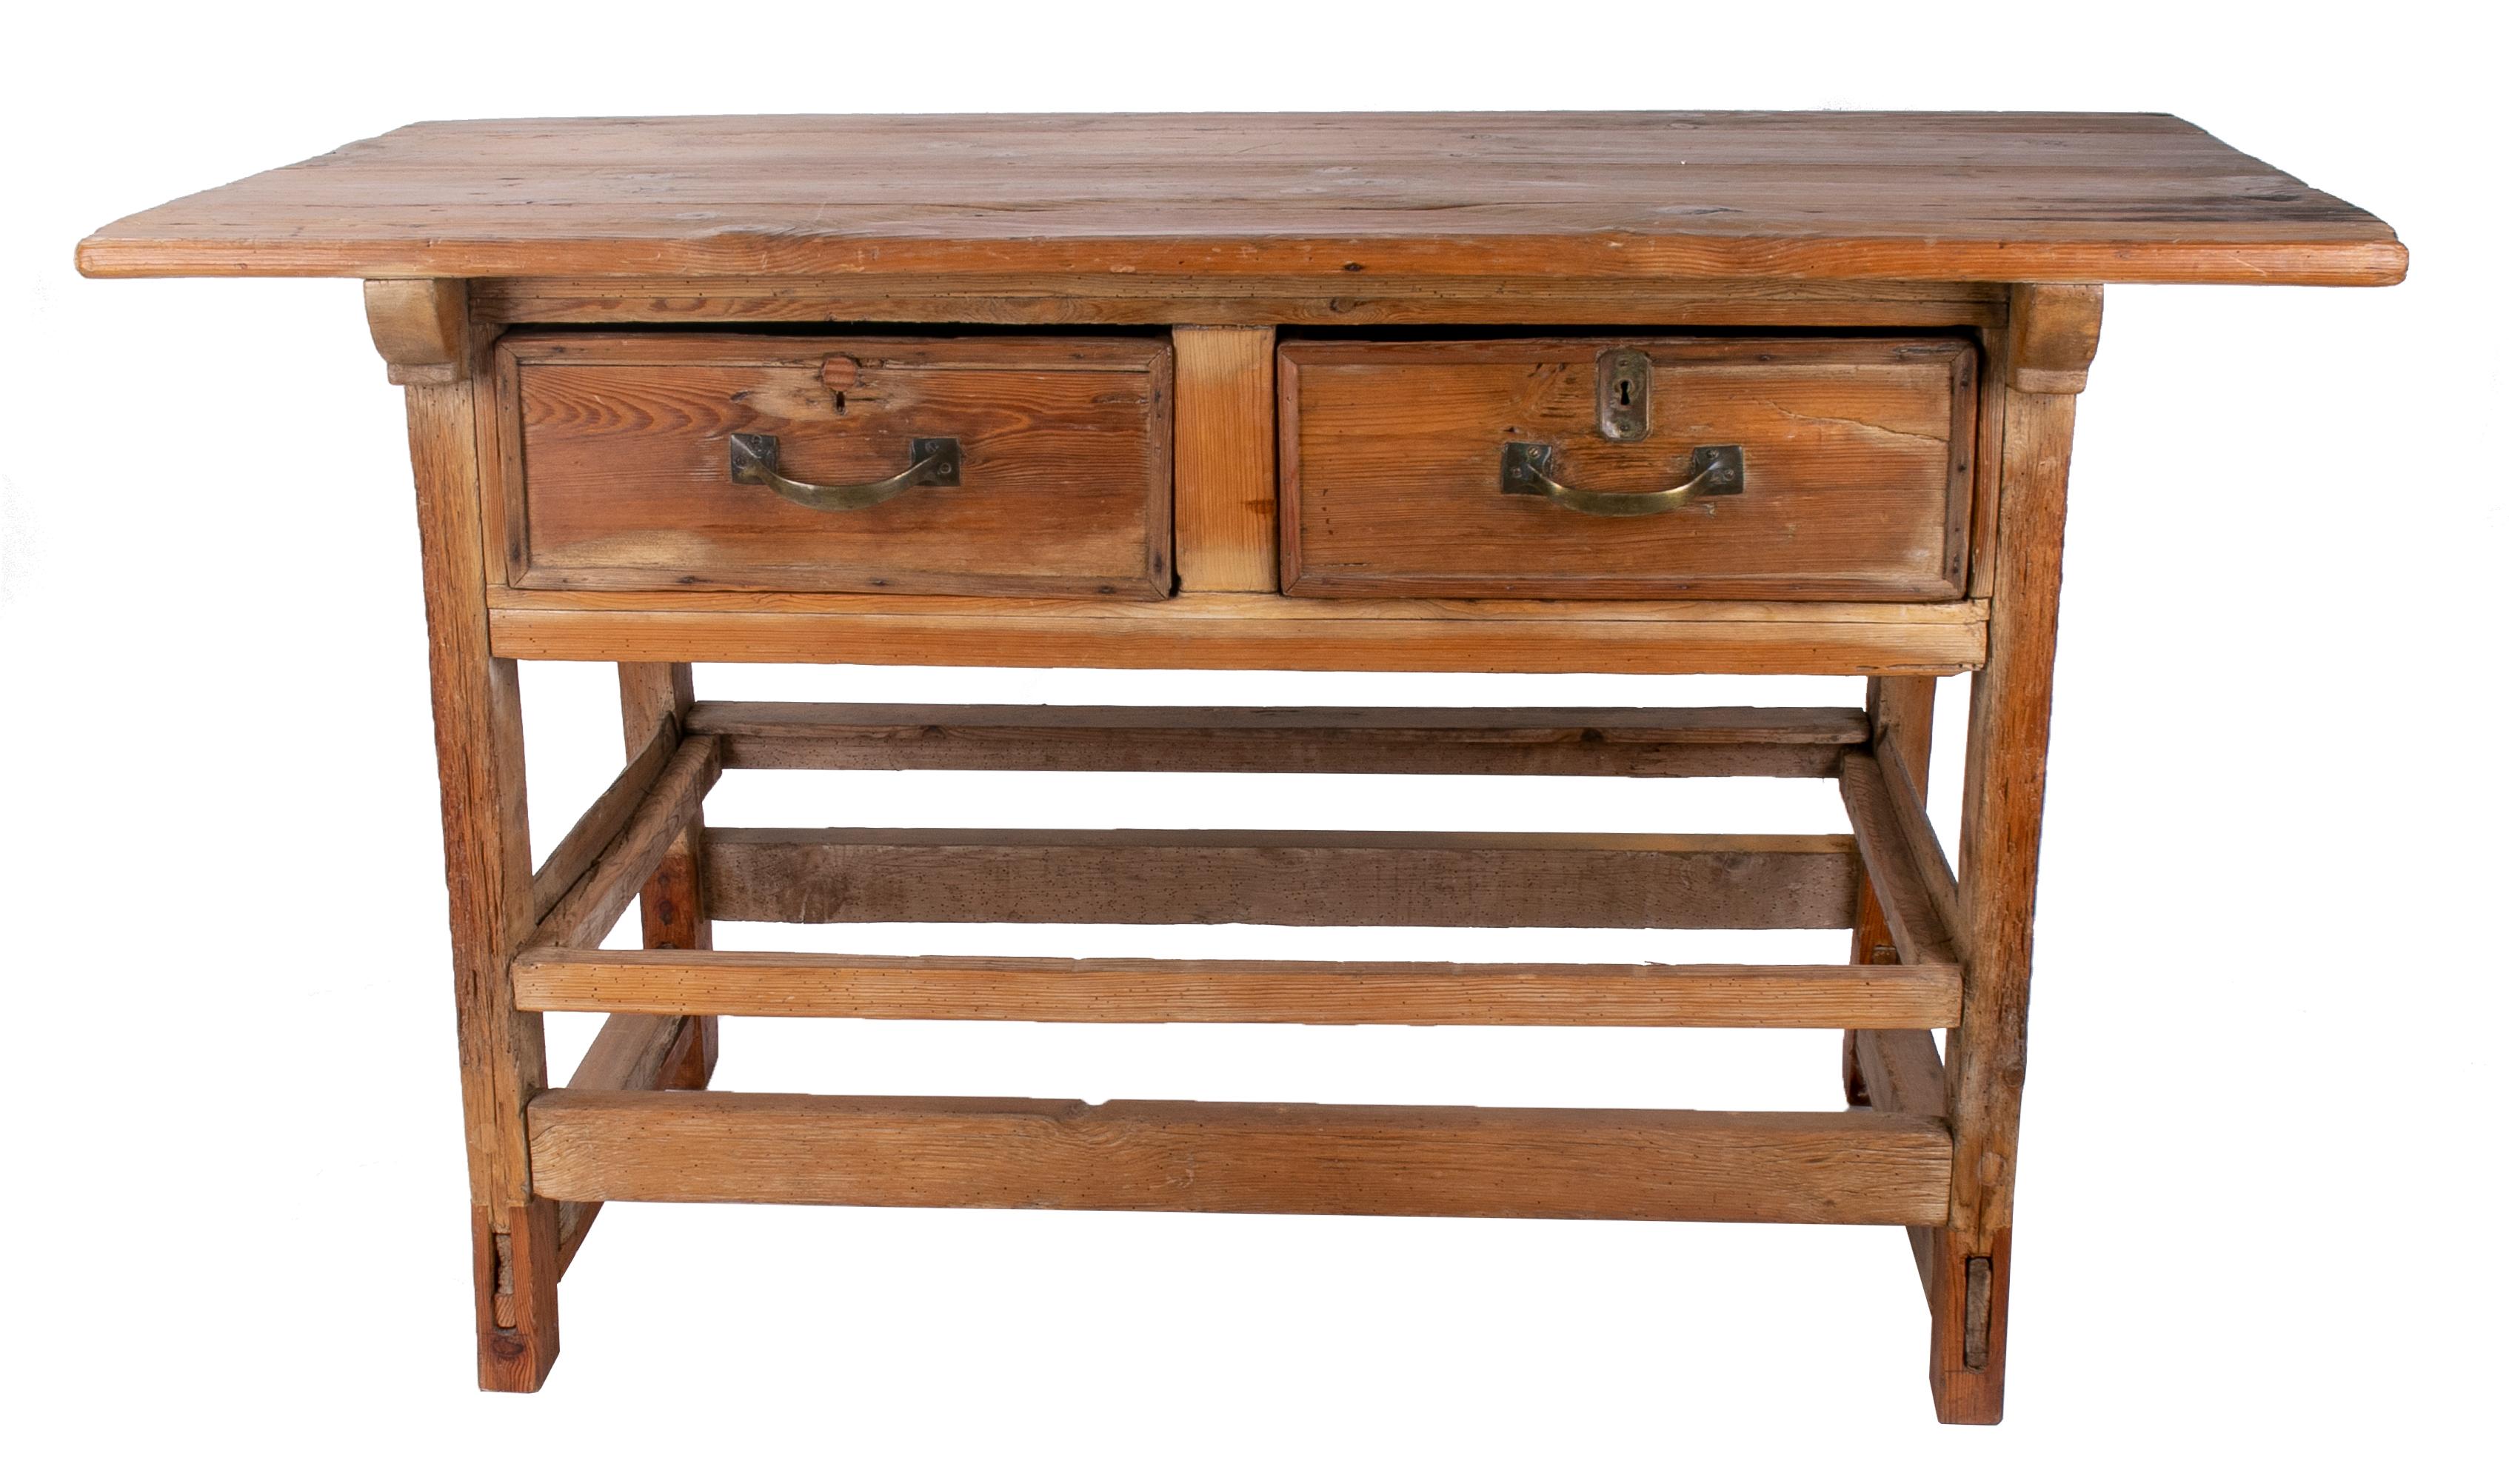 19th century Spanish two drawer rustic table with iron handles.